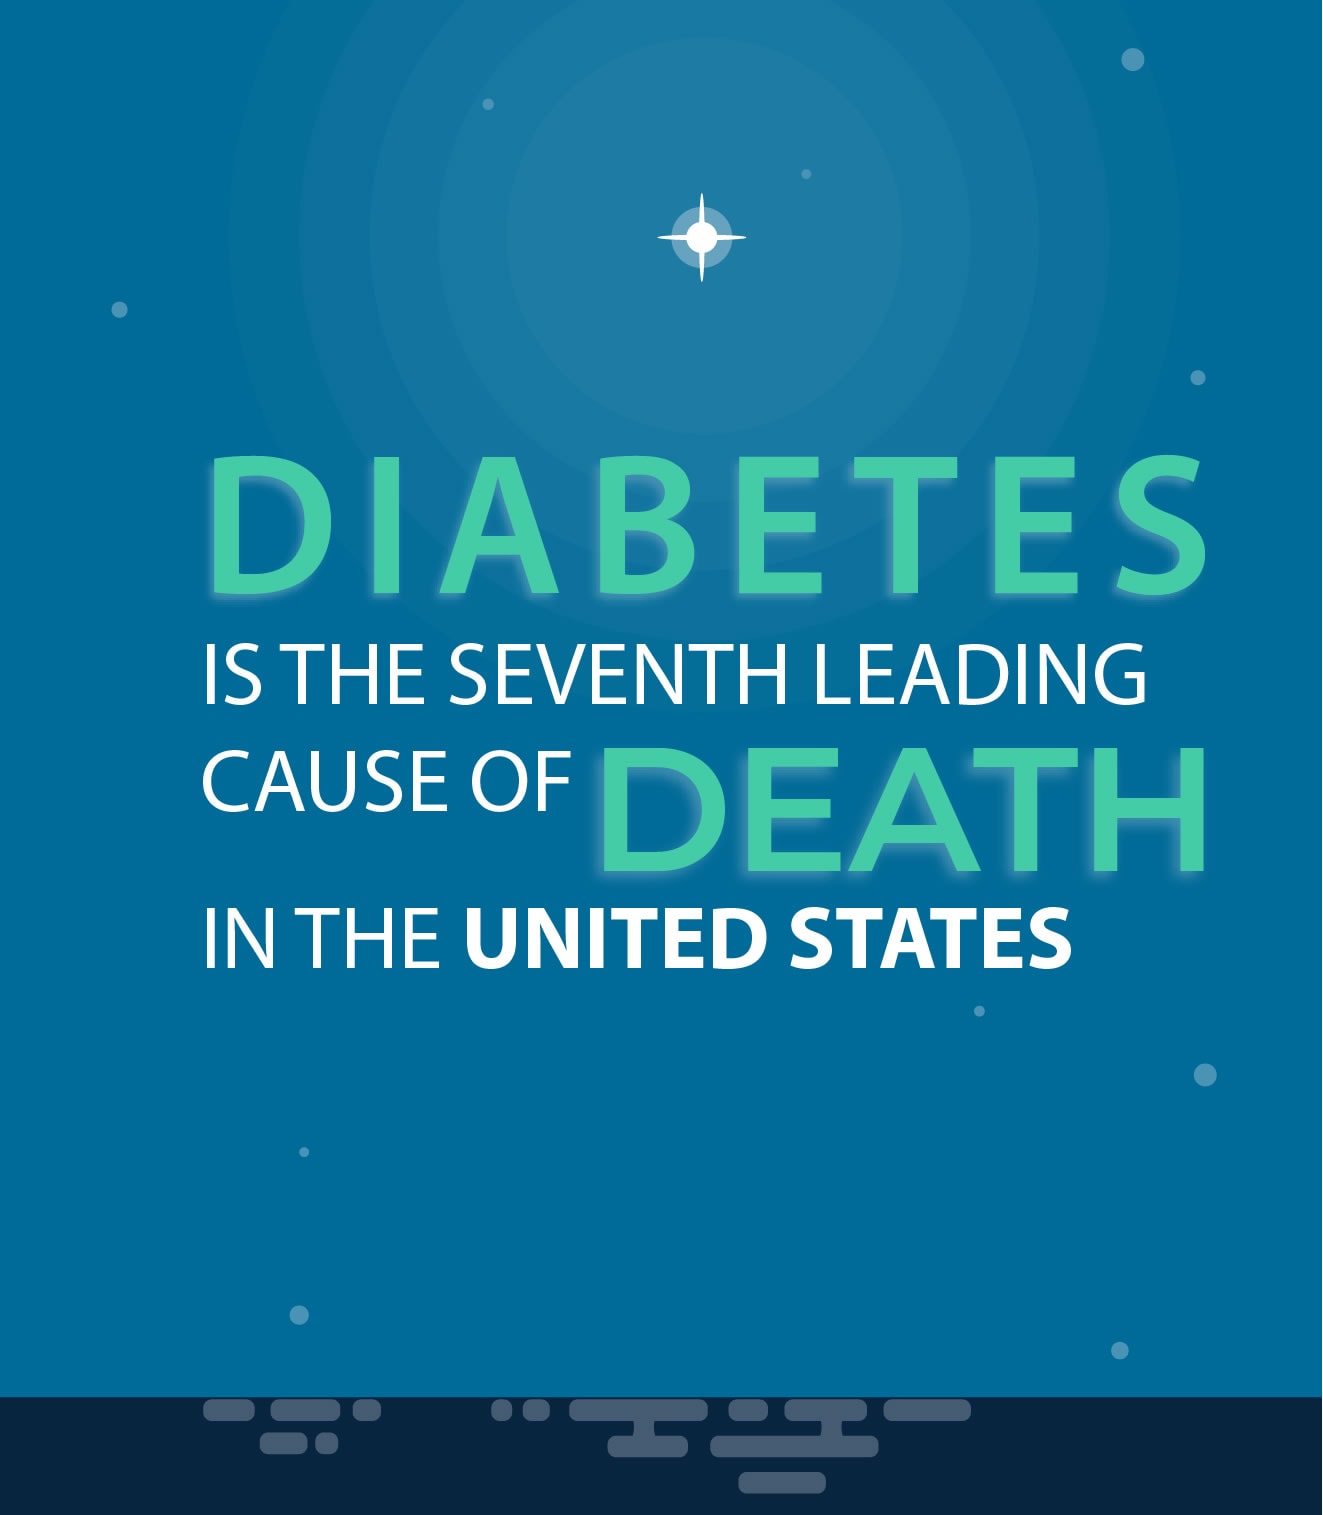 DIabetes was the seventh leading cause of death in the US